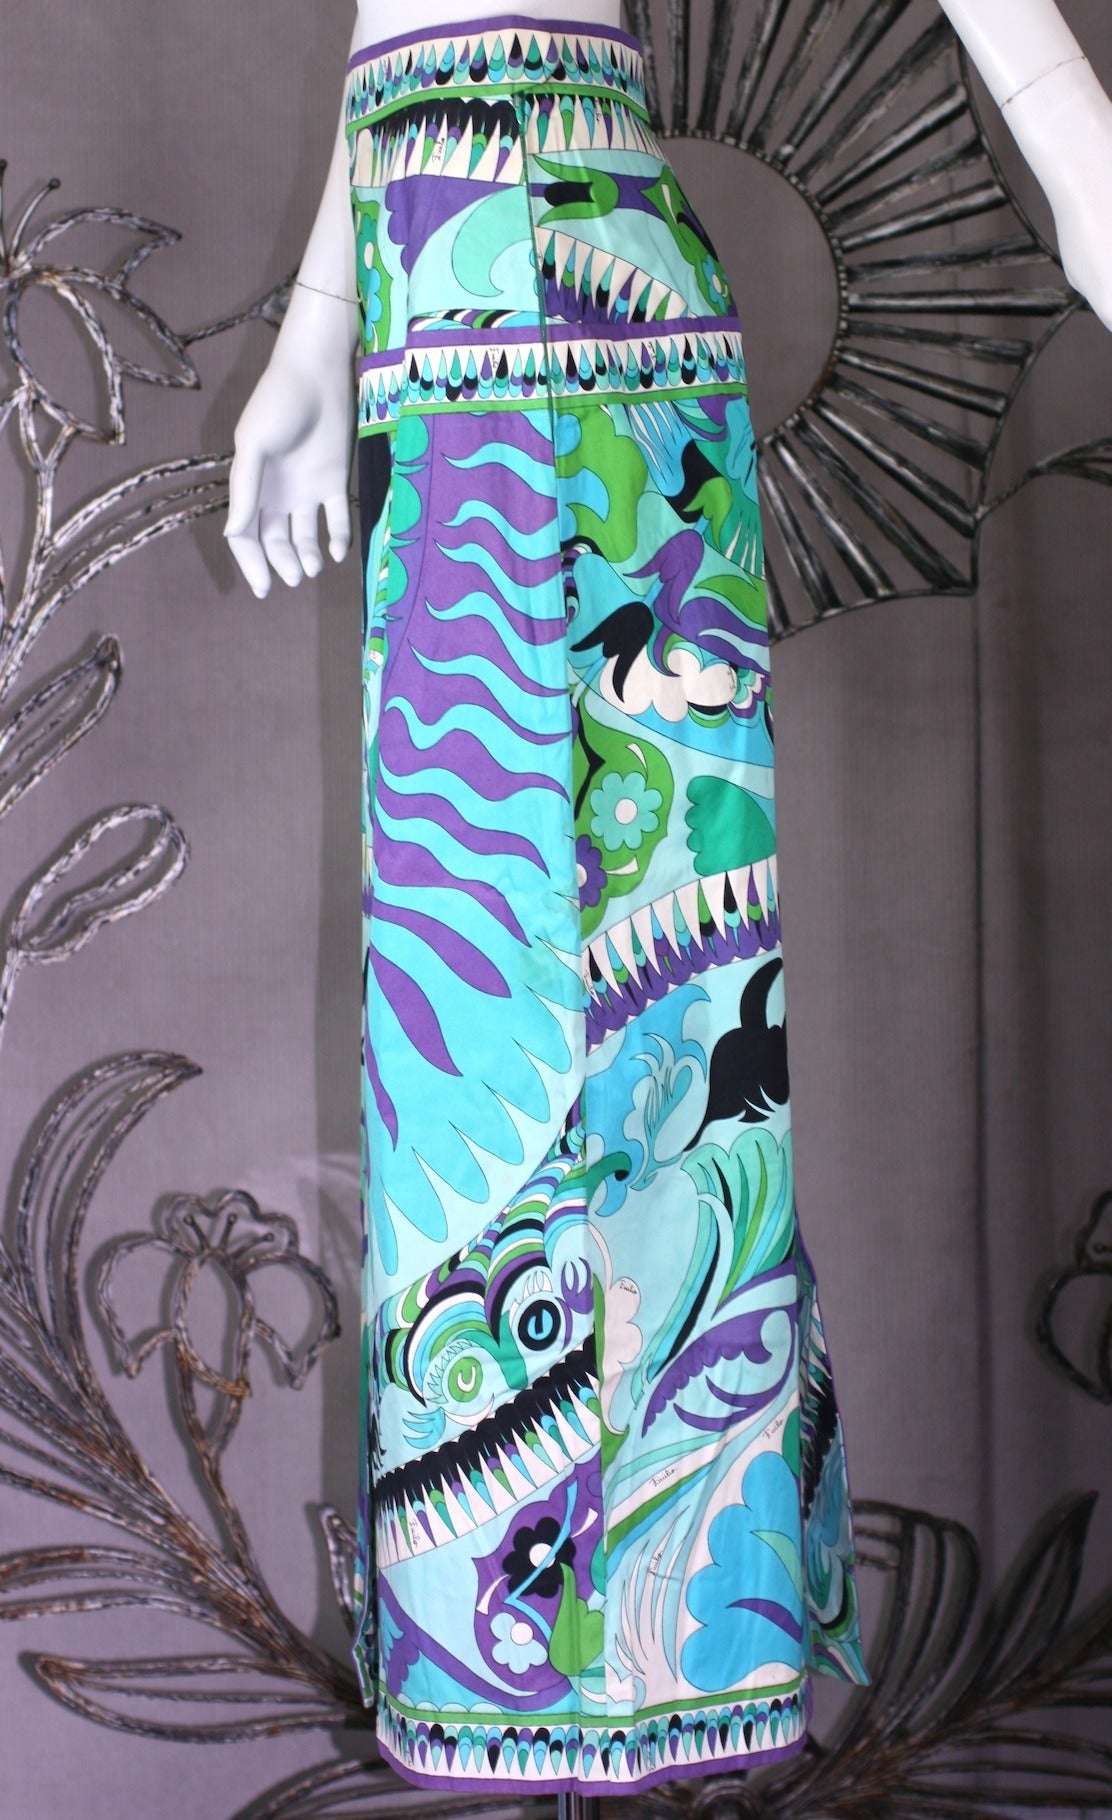 Emilio Pucci's Cotton Twill Maxi skirt in vibrant greens, purples with black and white. 
Patterned border on hem, waist, yoke and along front and back slits (15